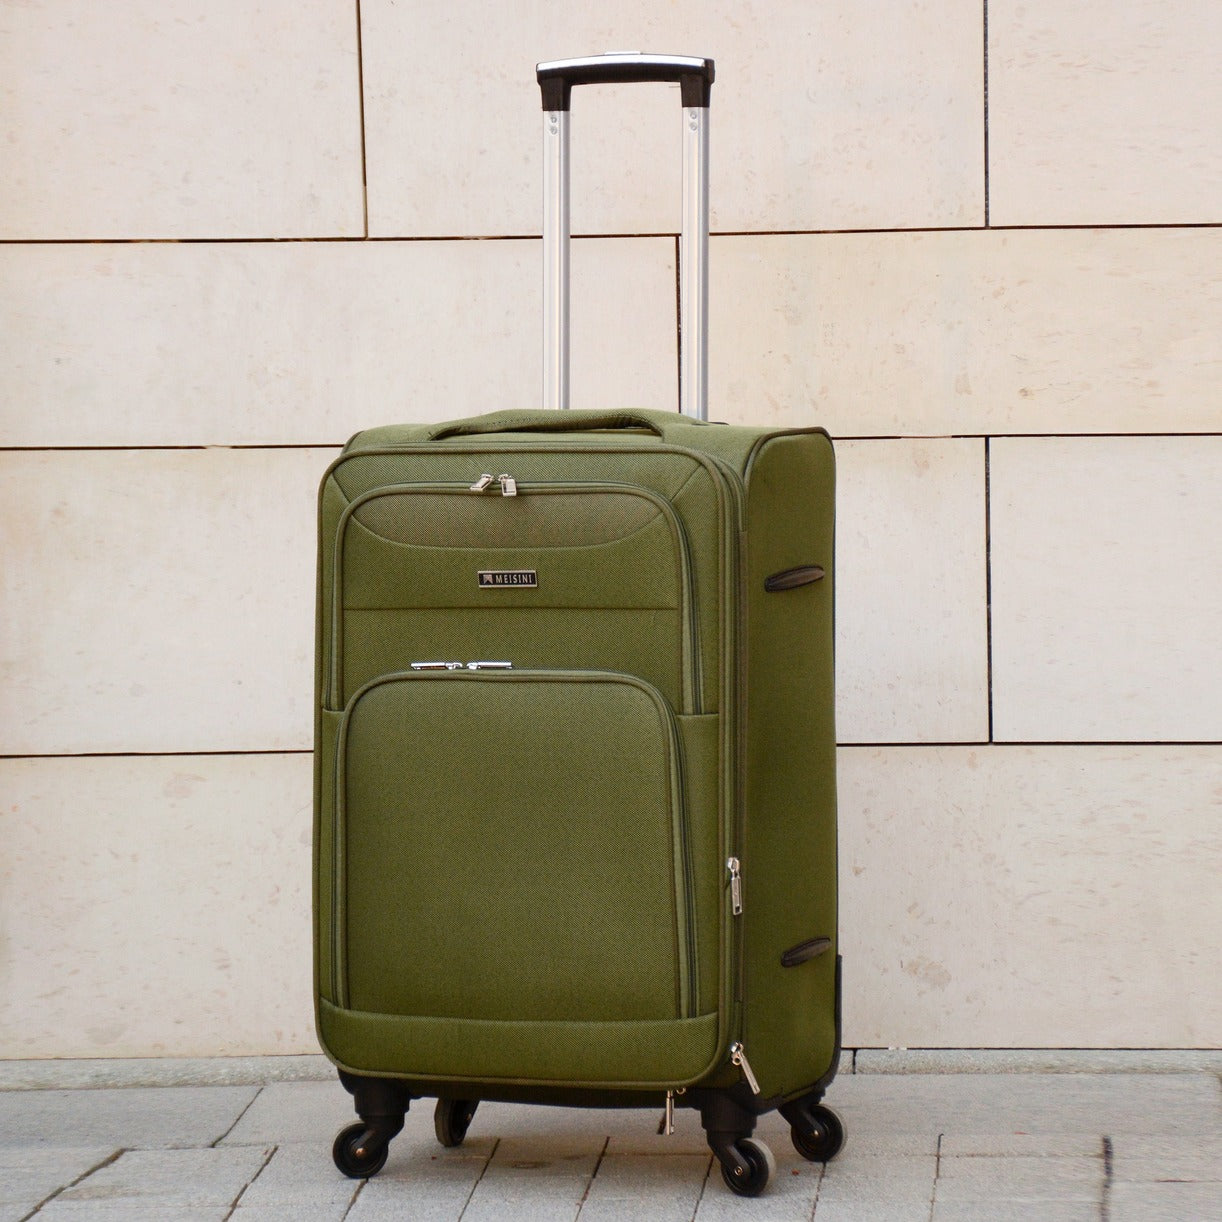 32" Green Colour LP 4 Wheel 0169 Luggage Lightweight Soft Material Trolley Bag Zaappy.com